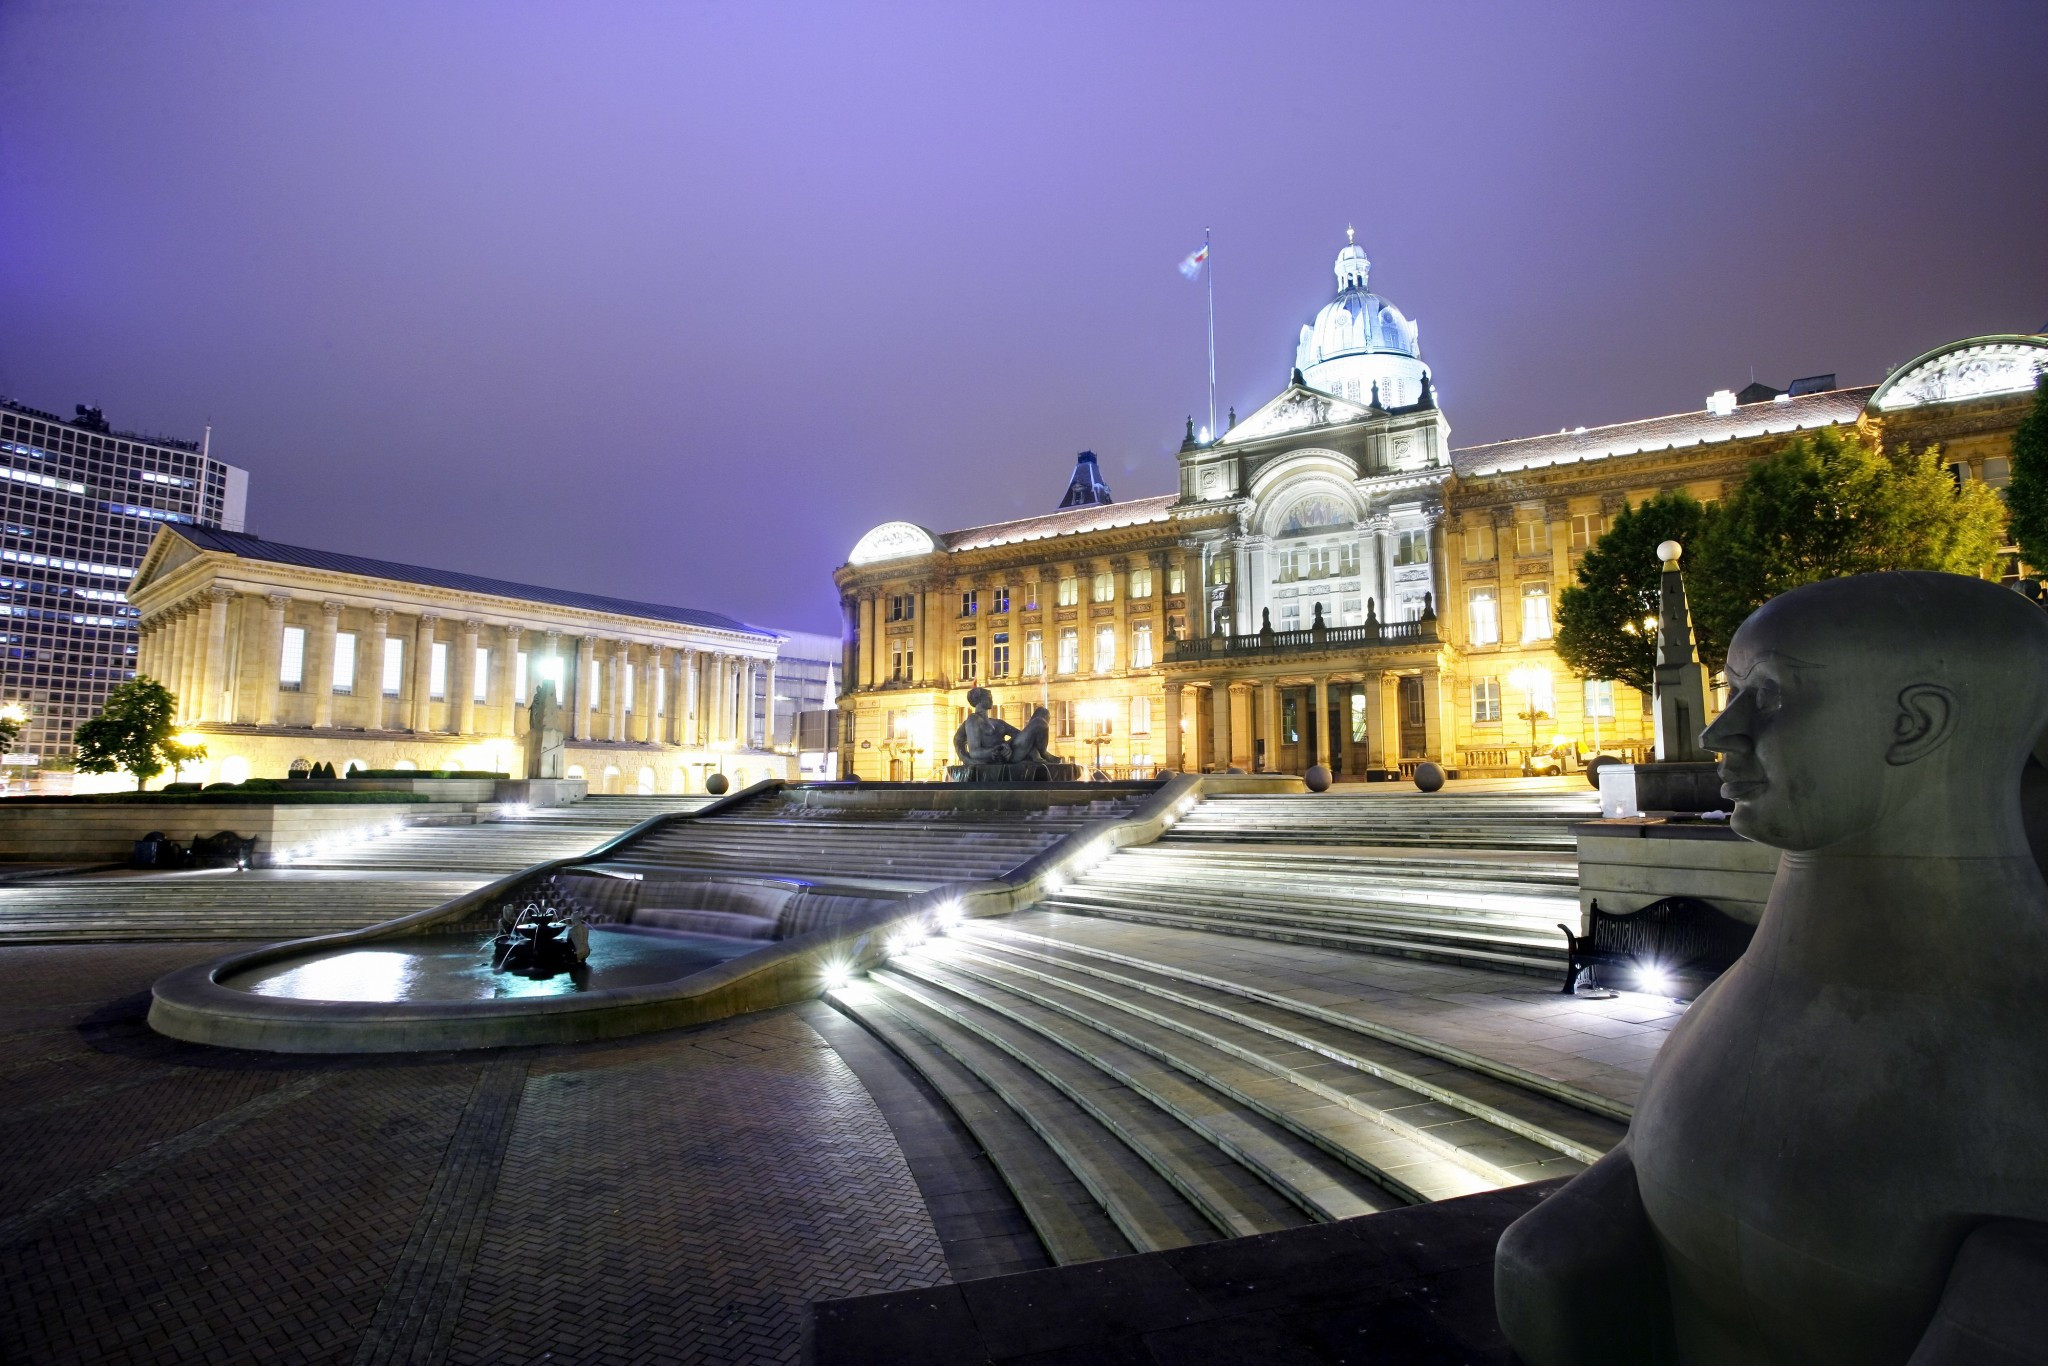 As well as being one of the main festival sites for Birmingham 2022, Victoria Square is also due to act as the finish for the marathon ©Getty Images